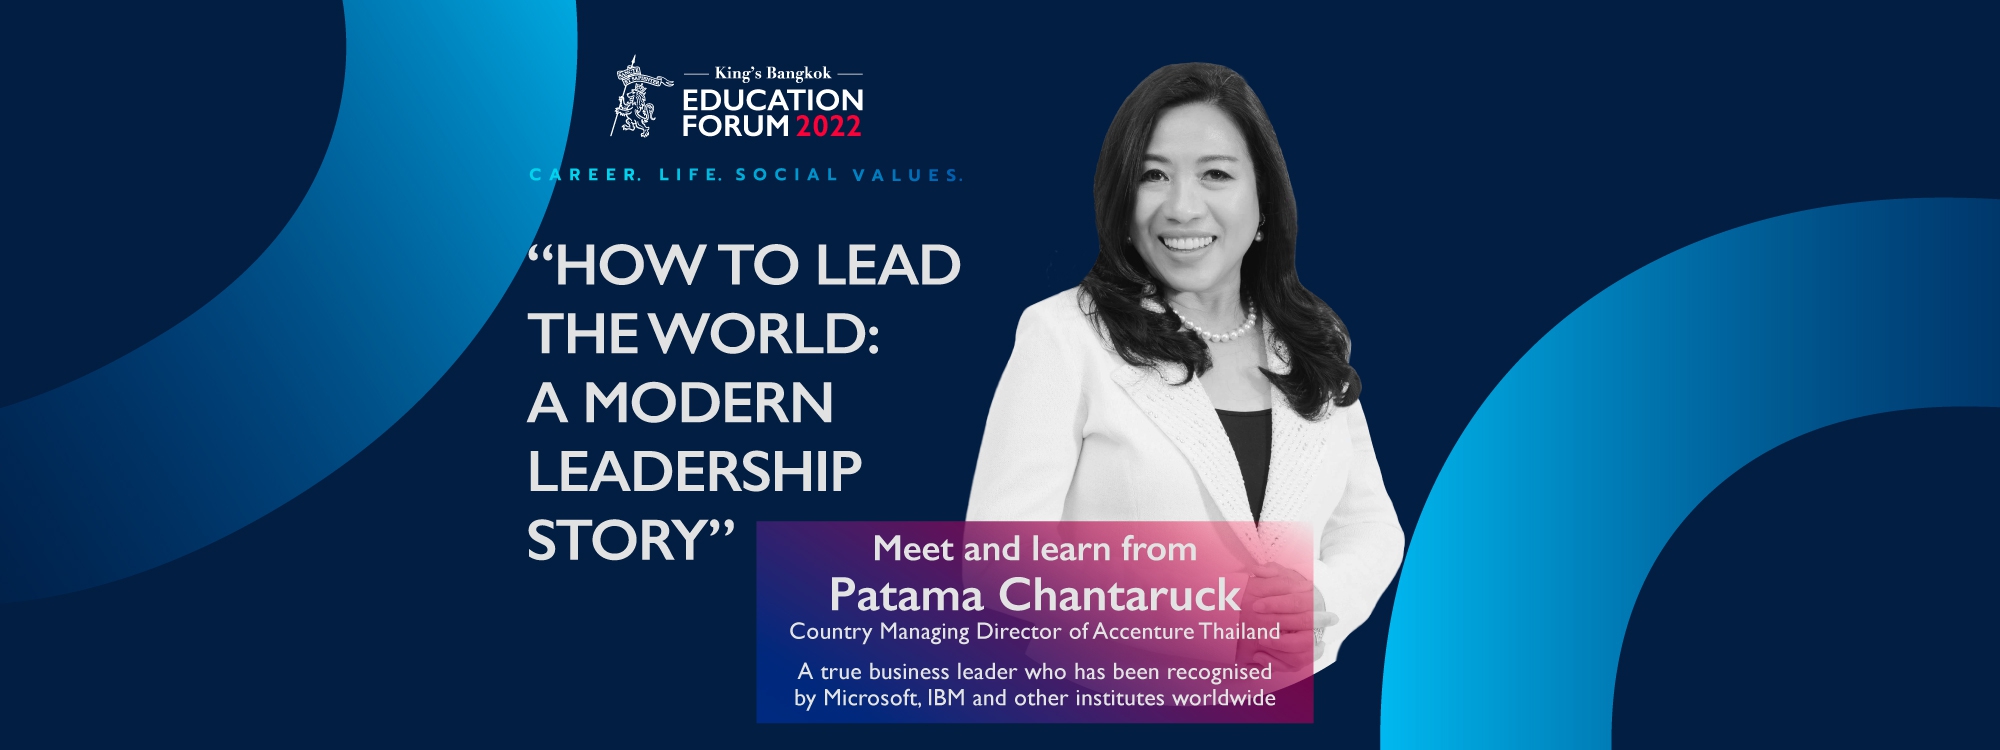 Go further with inspiration and lessons learnt from leaders with world-class experience